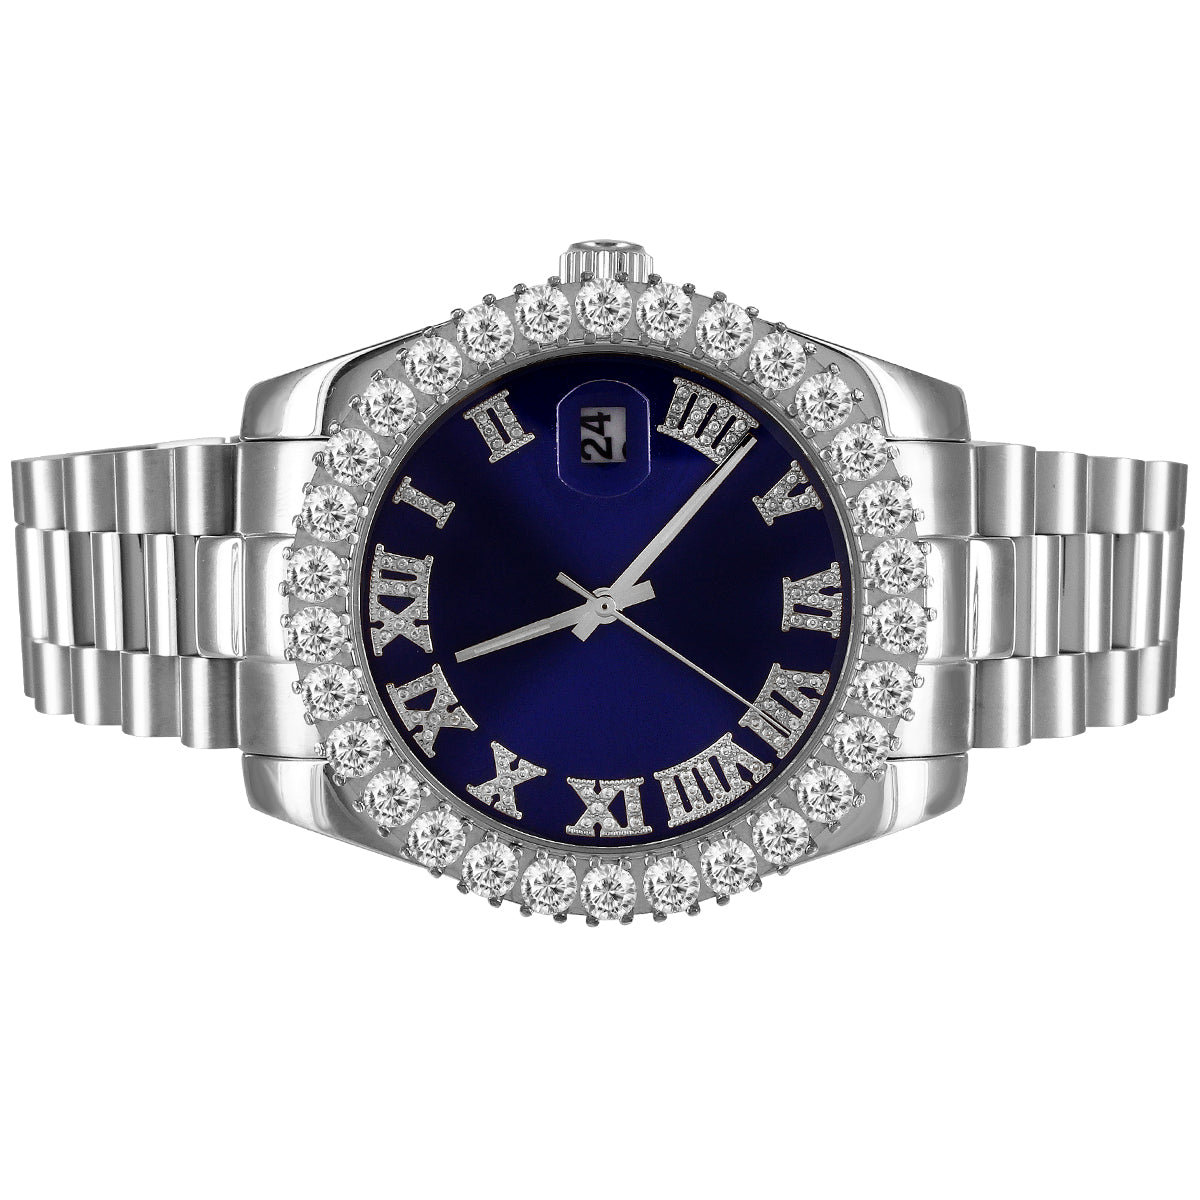 Mens 41mm Stainless Steel Blue Roman Dial Icy Bezel Watch